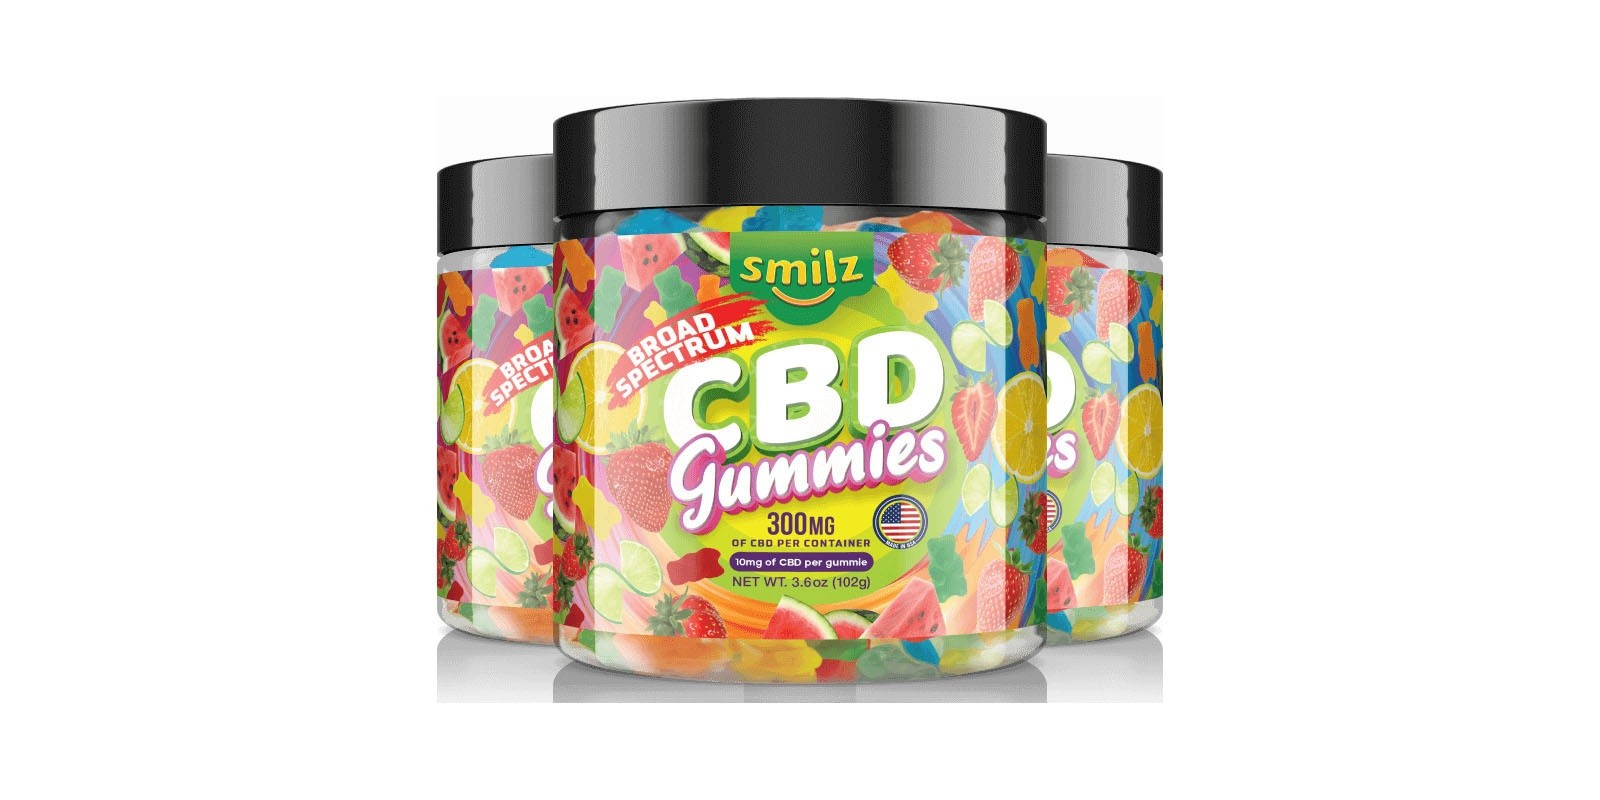  Smilz CBD Gummies Reviews – A Complete Herbal Formula To Cure Chronic Aches?